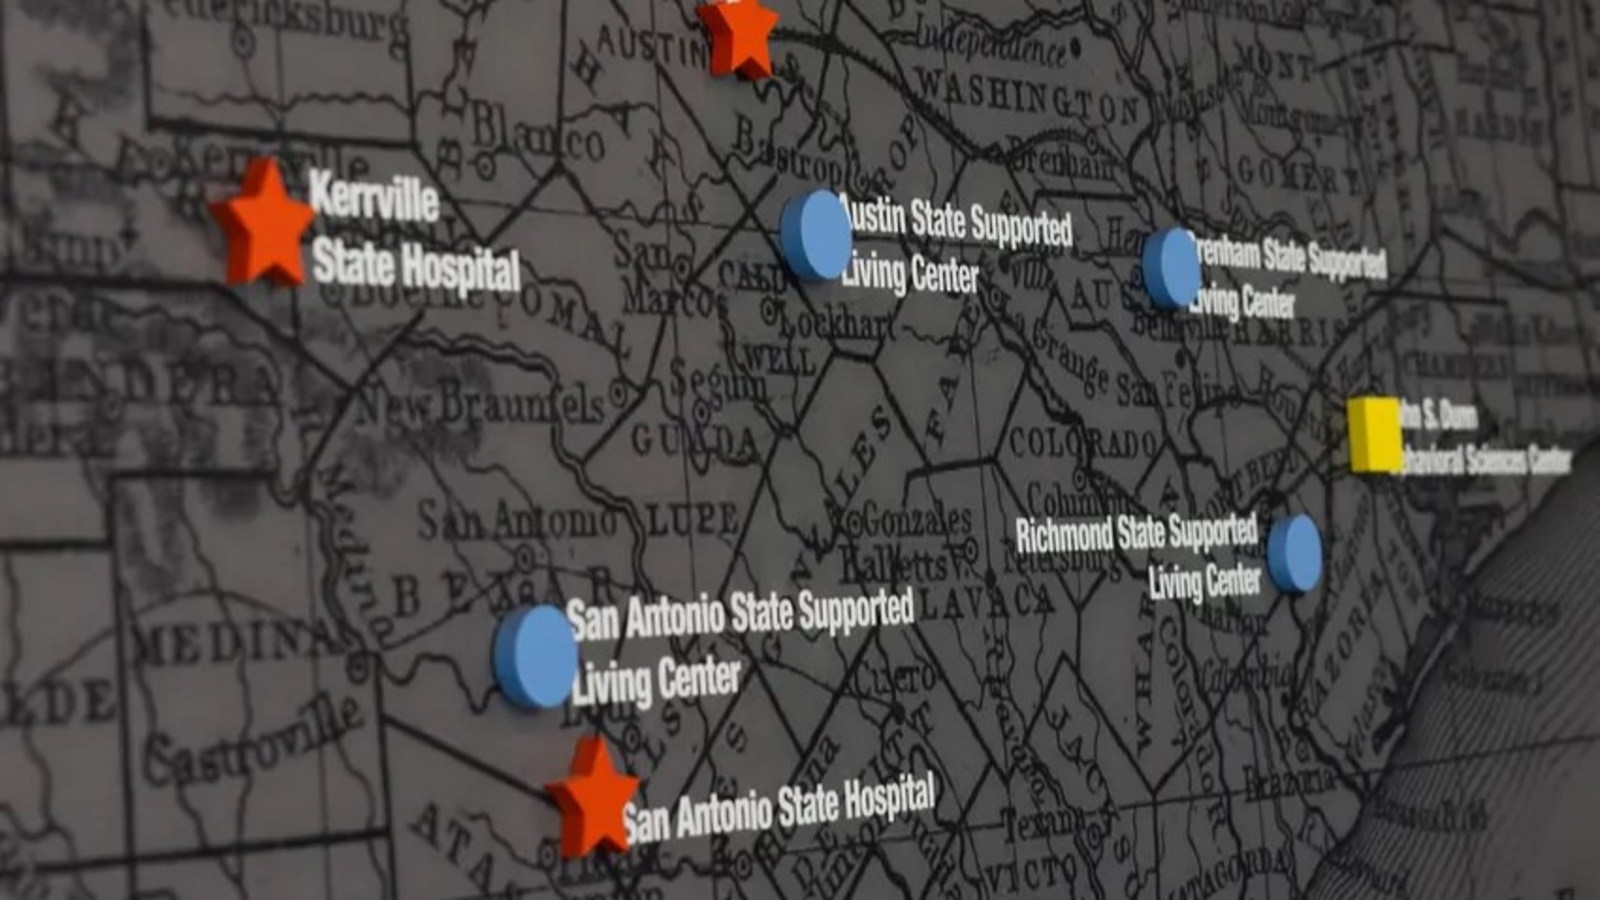 Texas to begin construction on 7 new psychiatric hospital projects this year [Video]